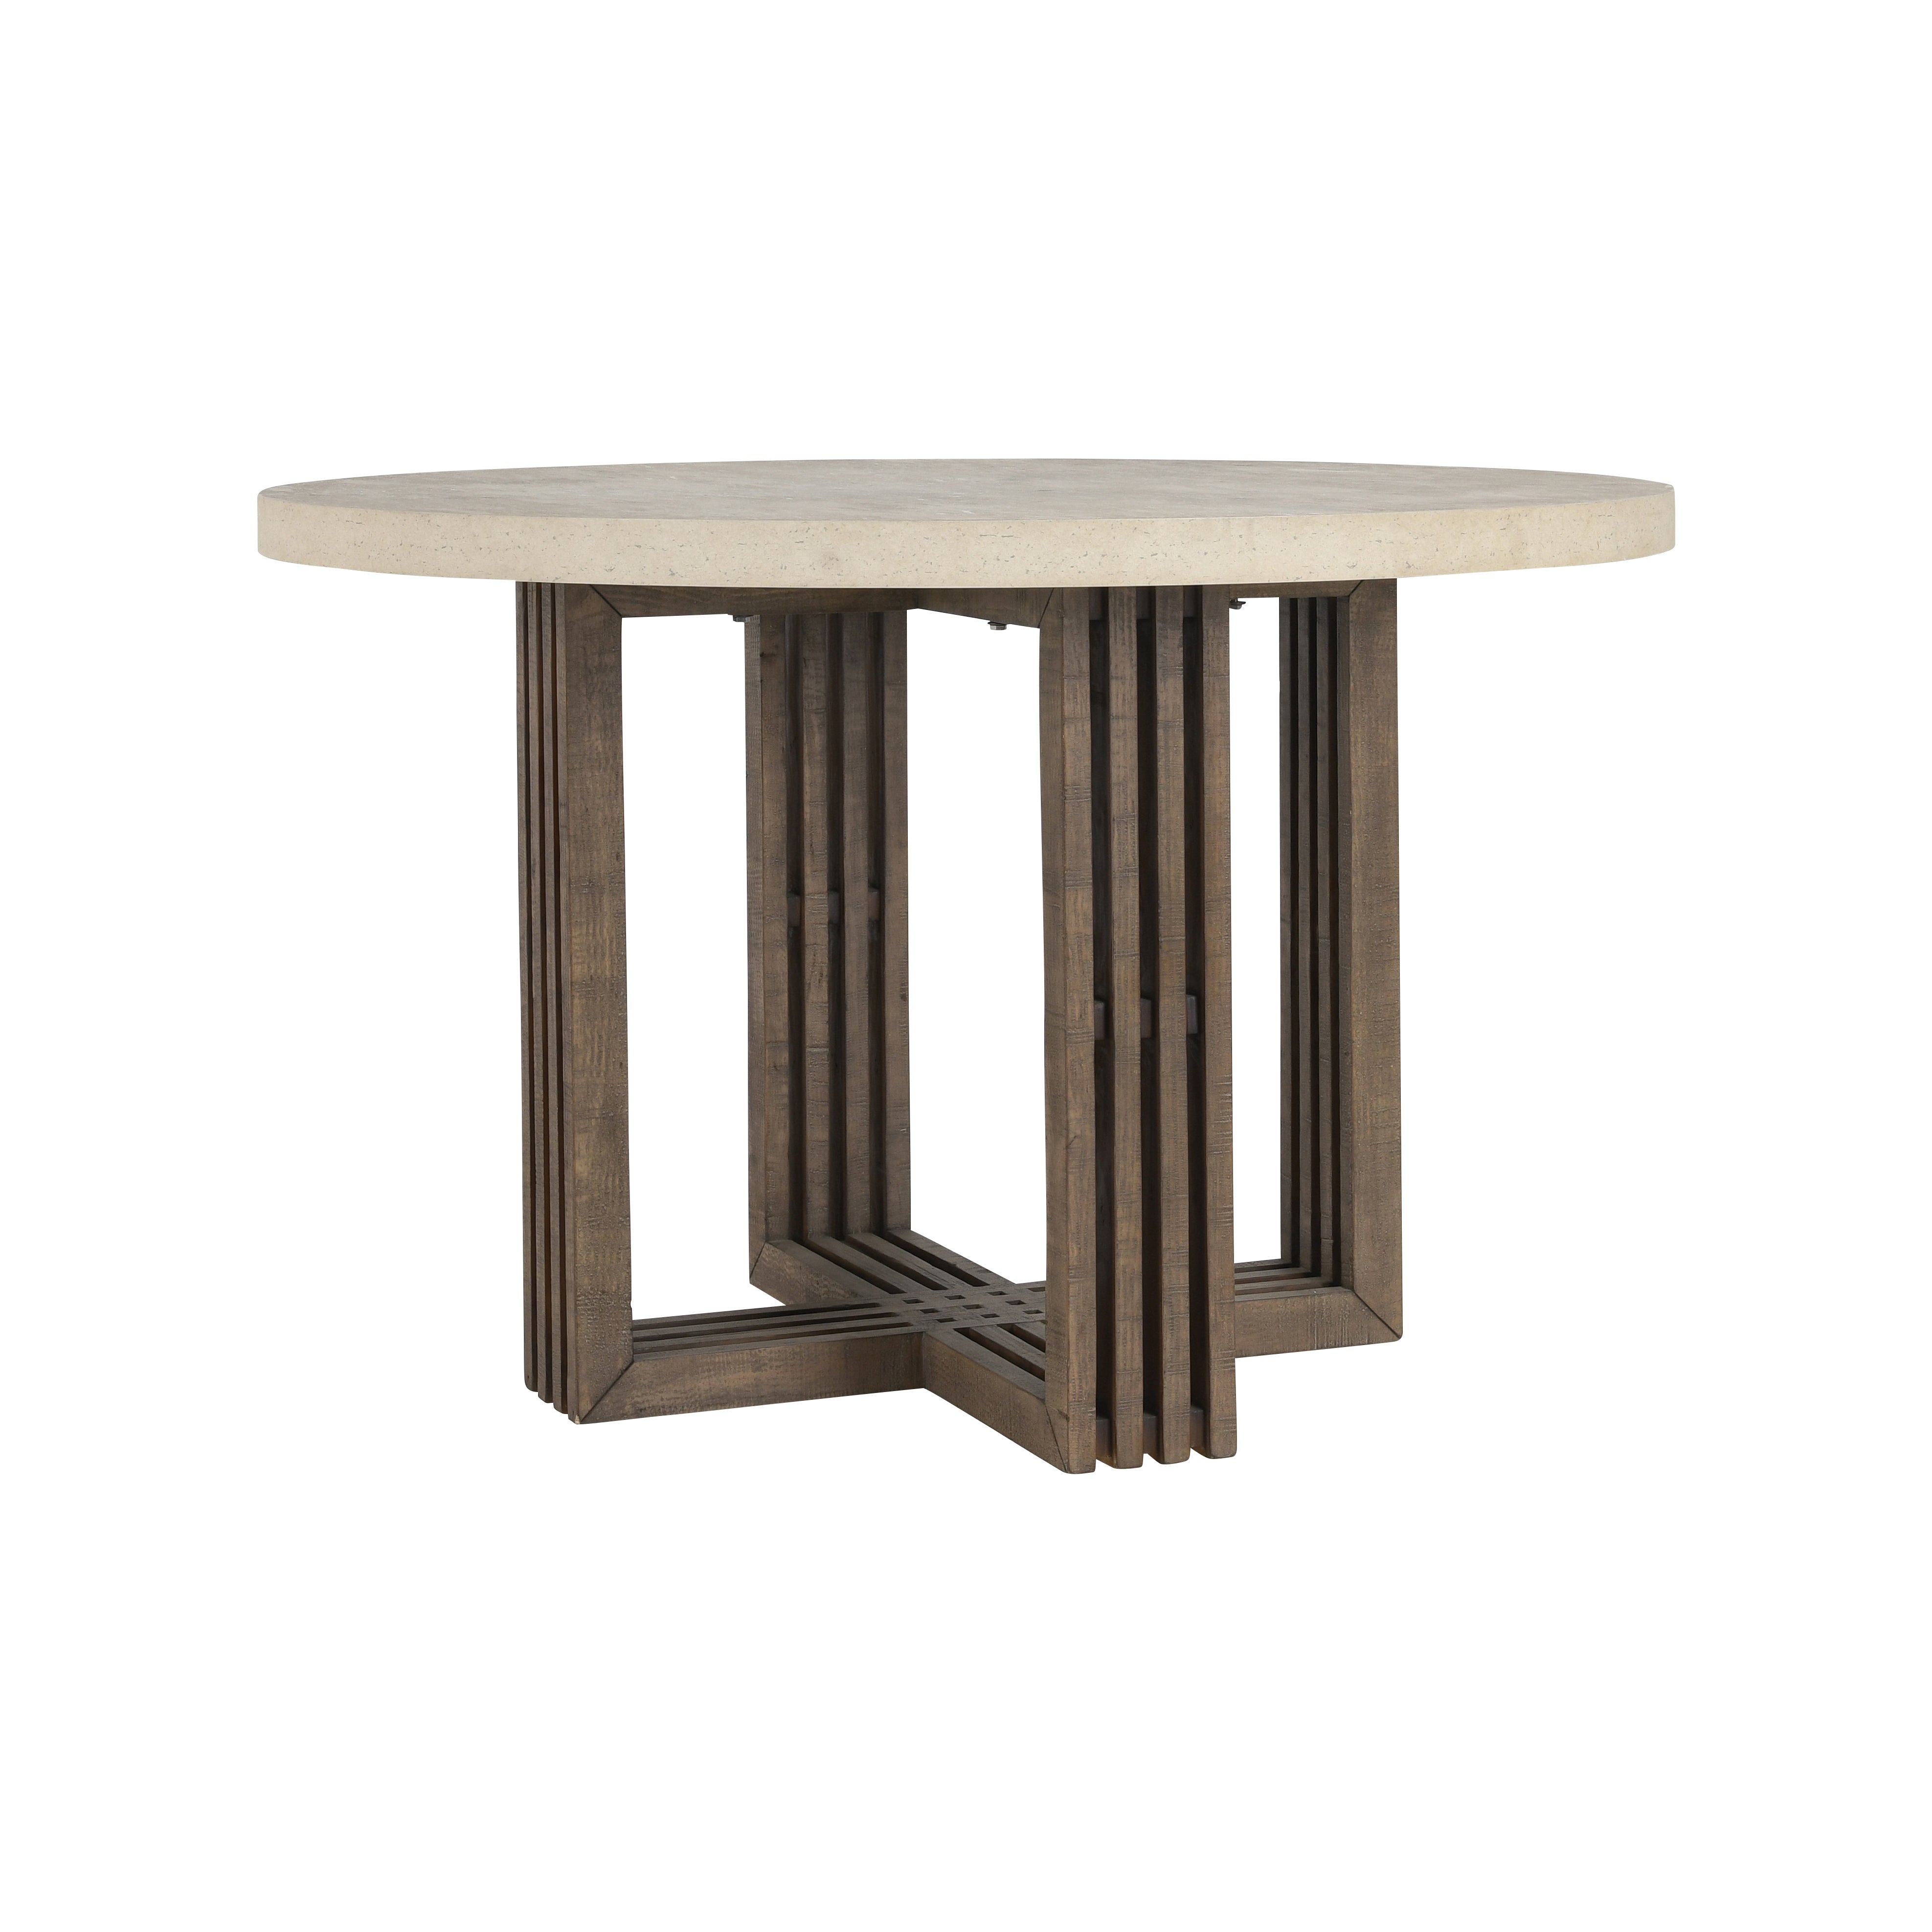 Grier Plaster Dining Table angled view